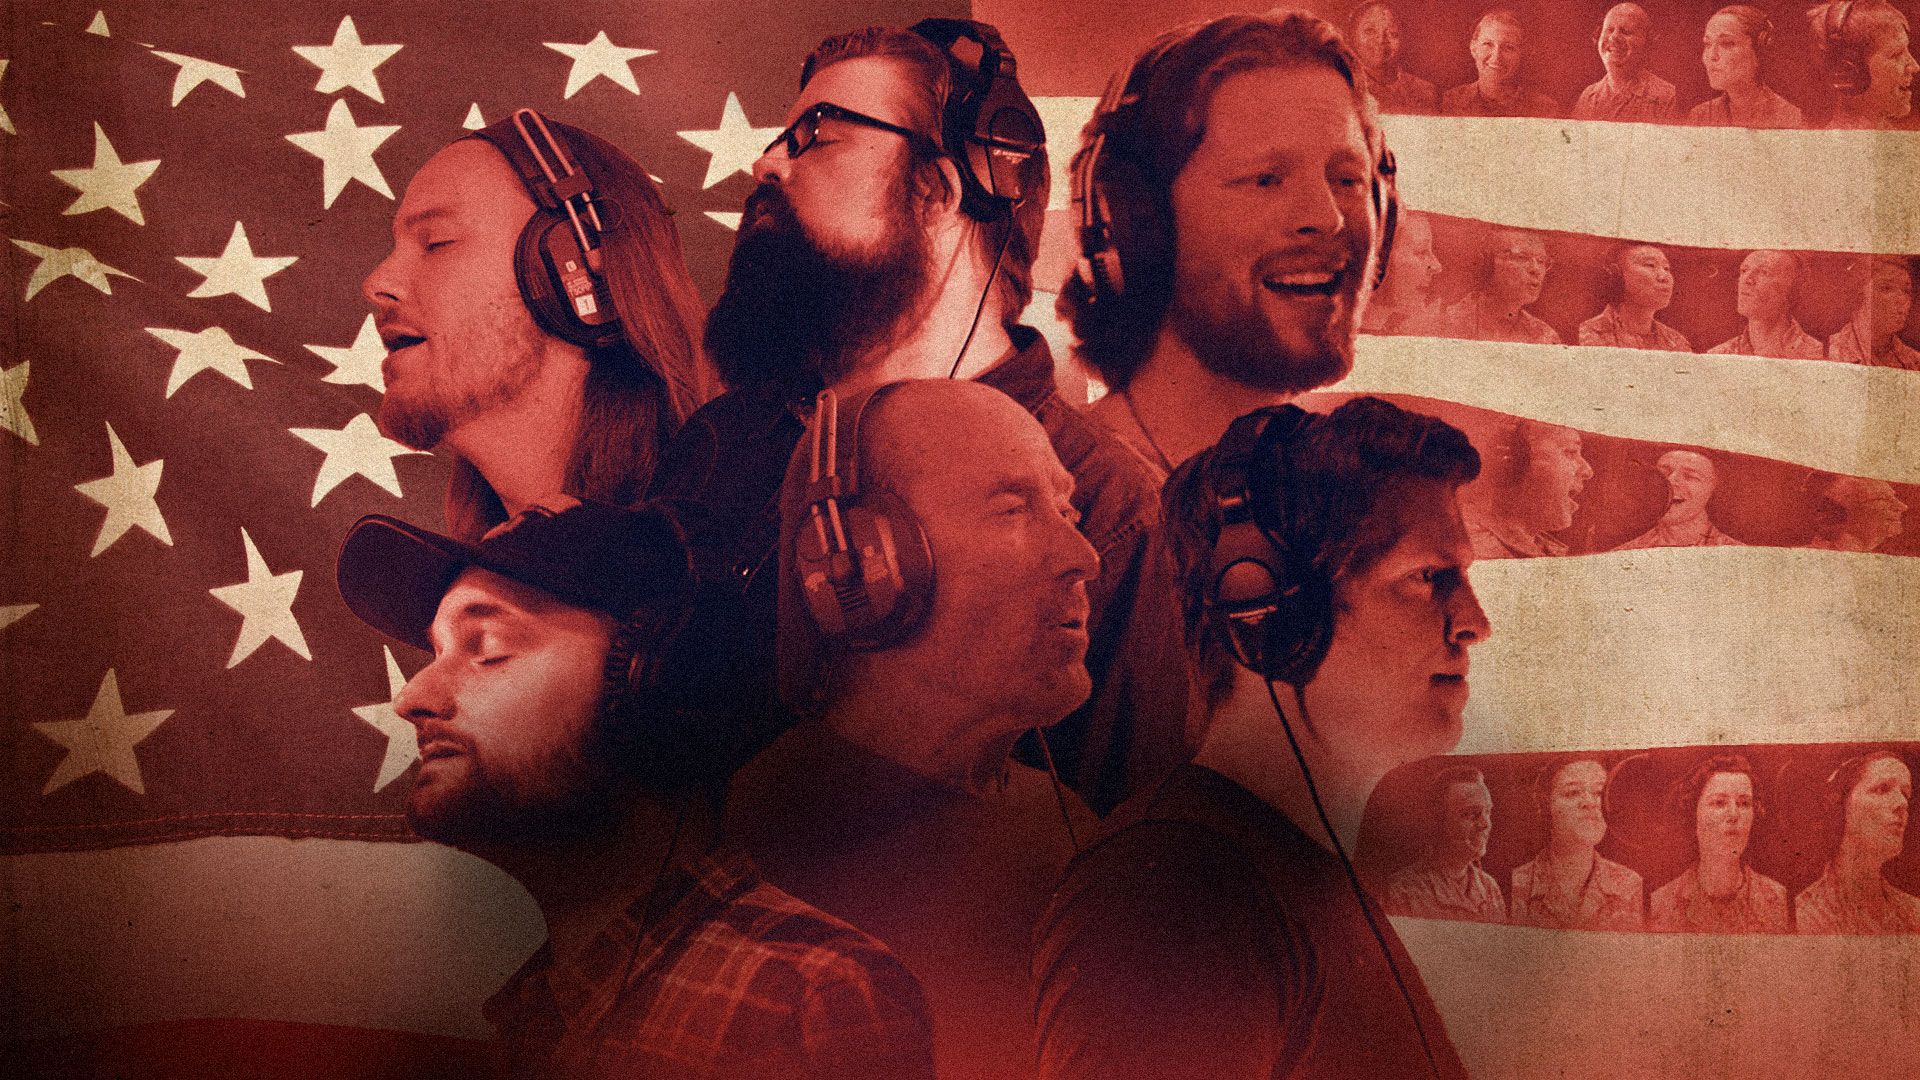 Lee Greenwood Collaborates With Home Free And The US Air Force For Stirring New Version Of “God Bless The USA”